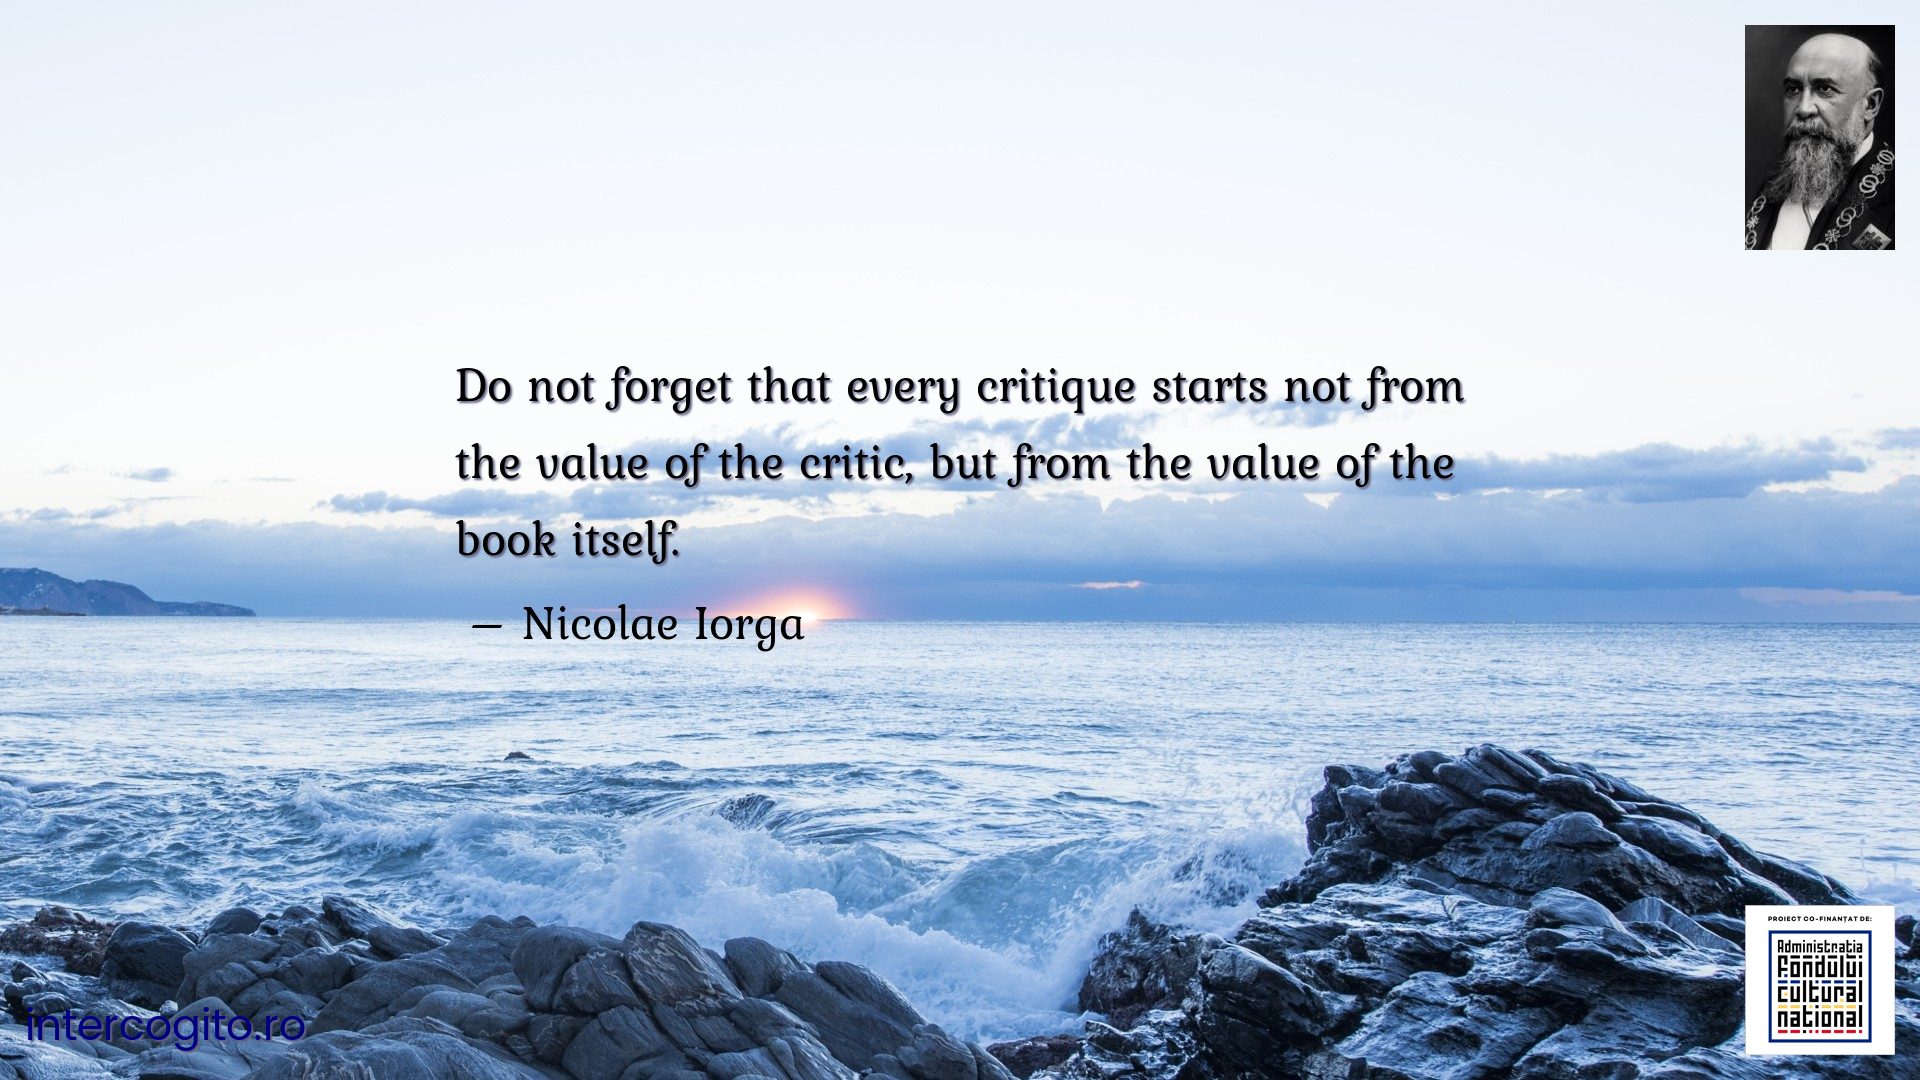 Do not forget that every critique starts not from the value of the critic, but from the value of the book itself.